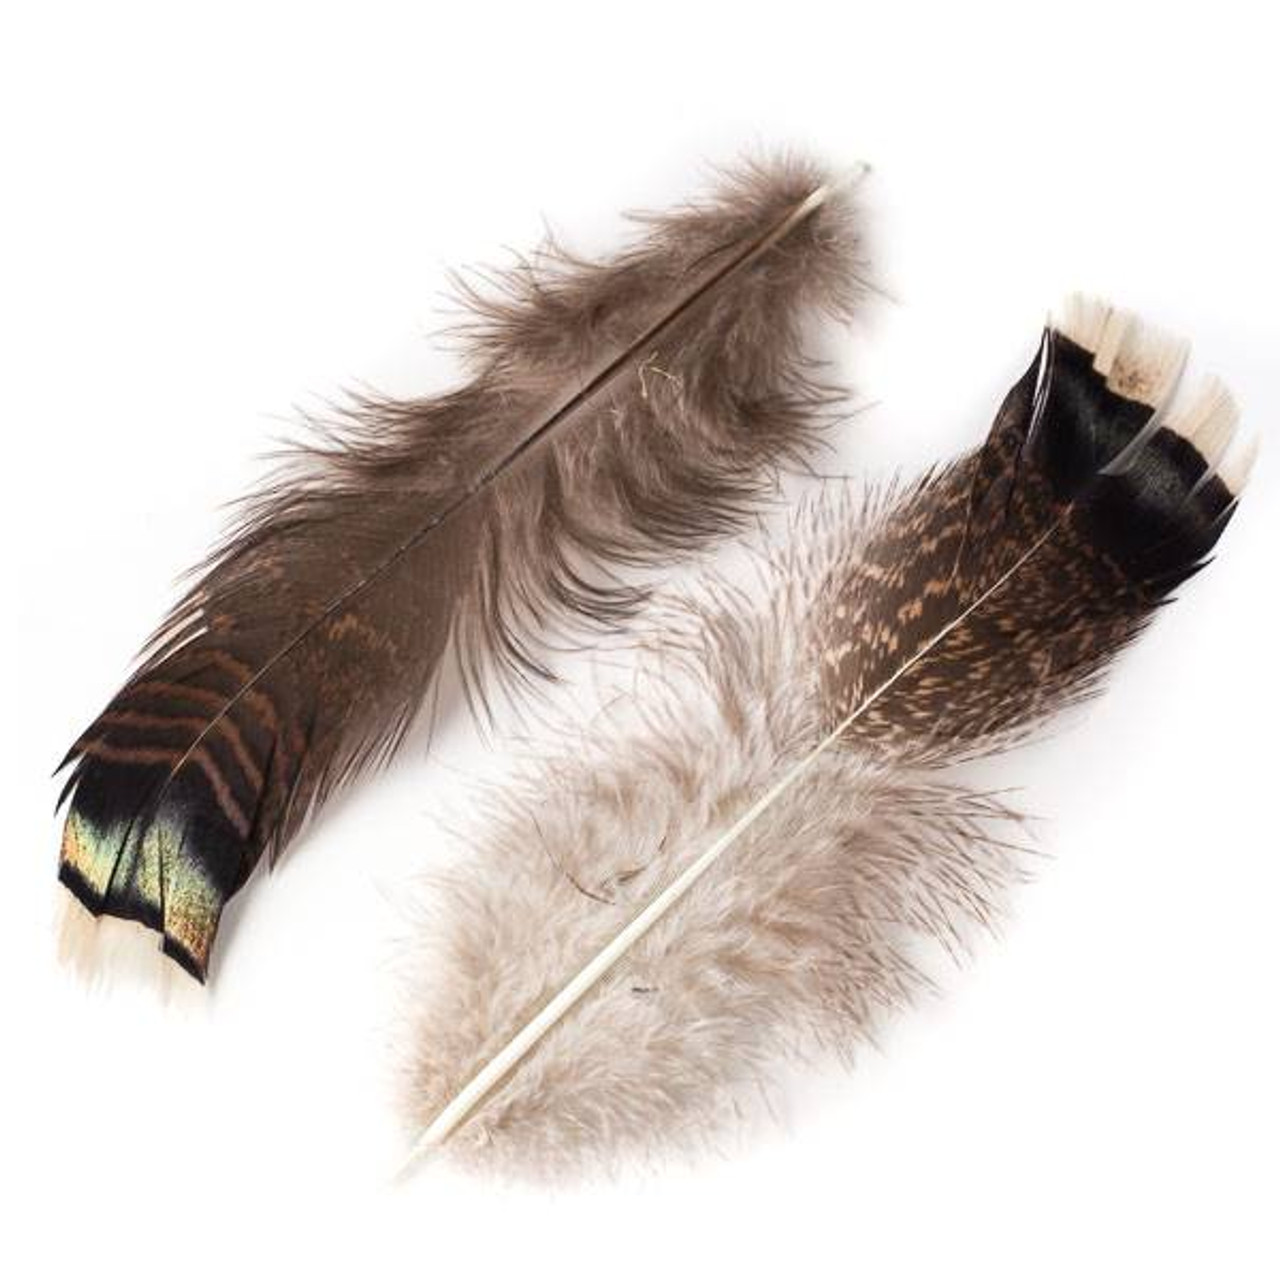 Brown and Black Striped Feathers, 6-7 inches, 2 per bag - #4-5